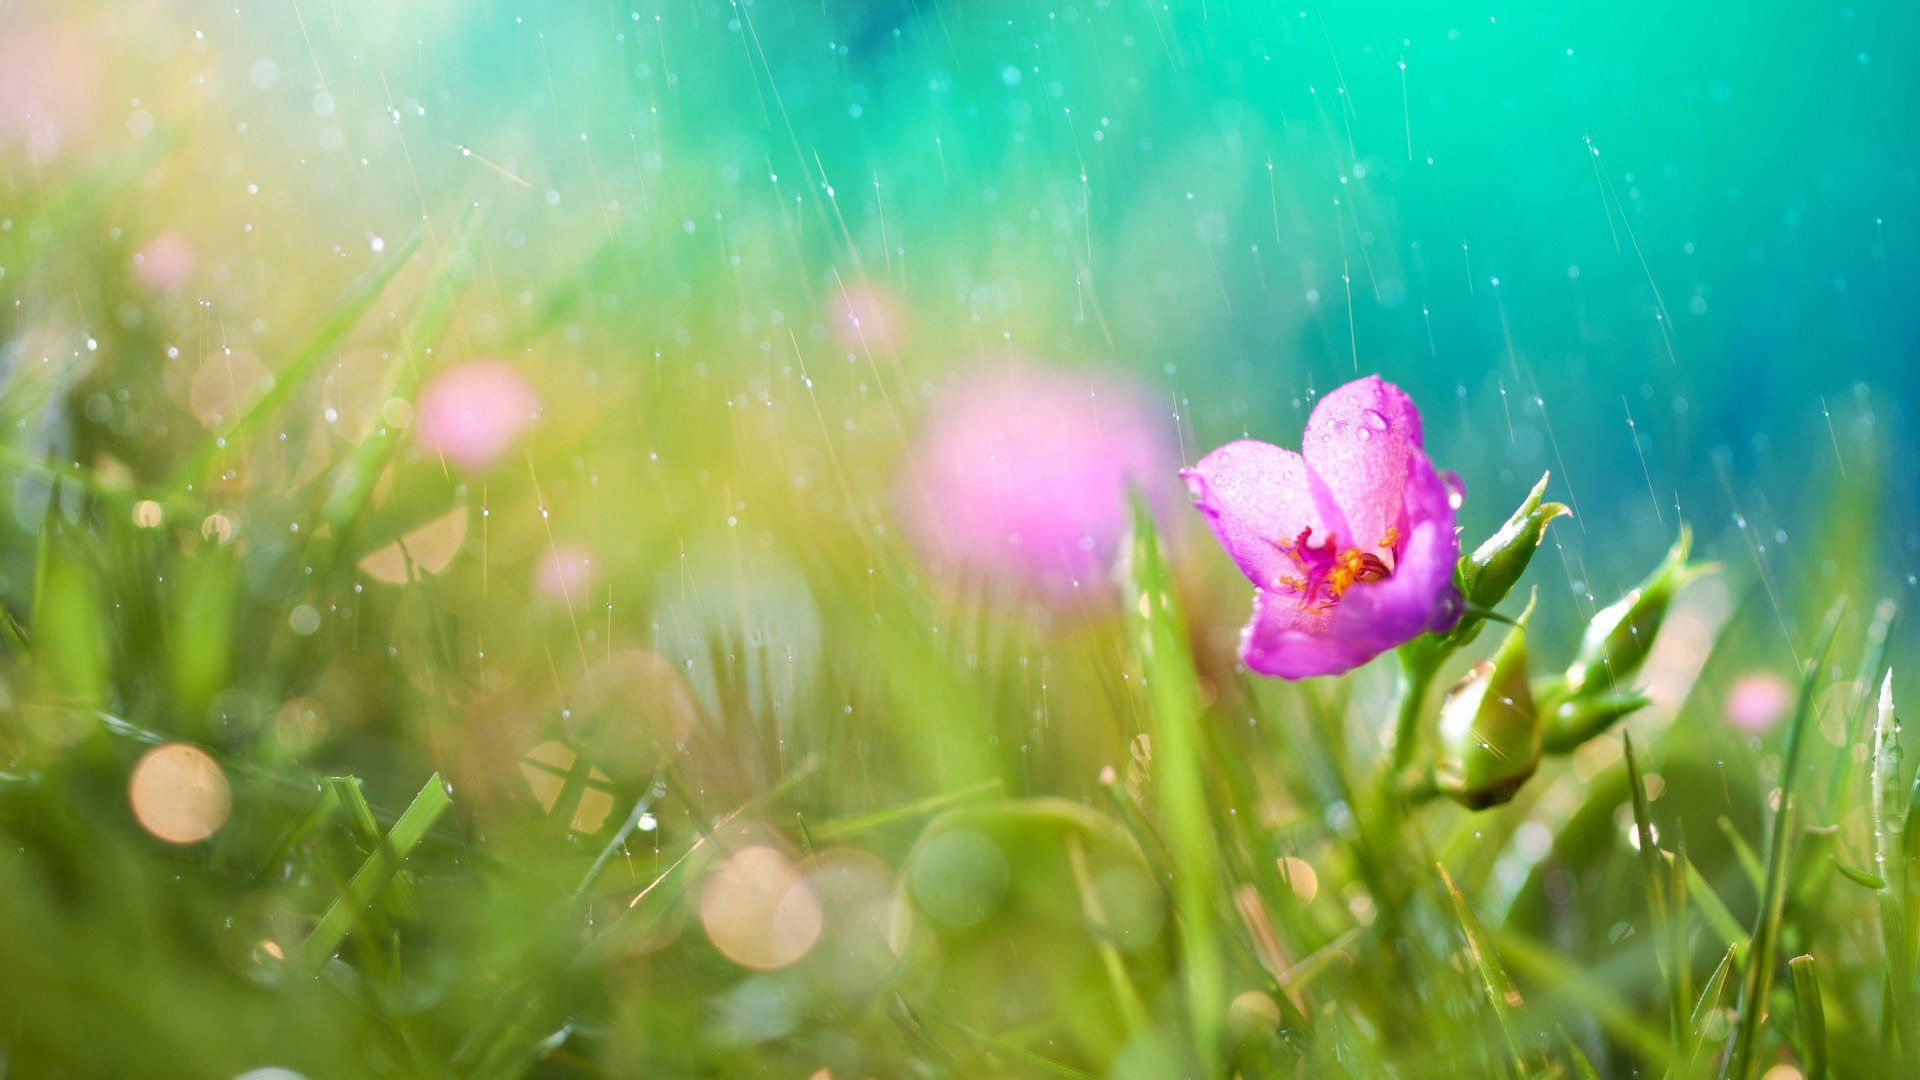 Just click download to download free Spring Rain Wallpaper